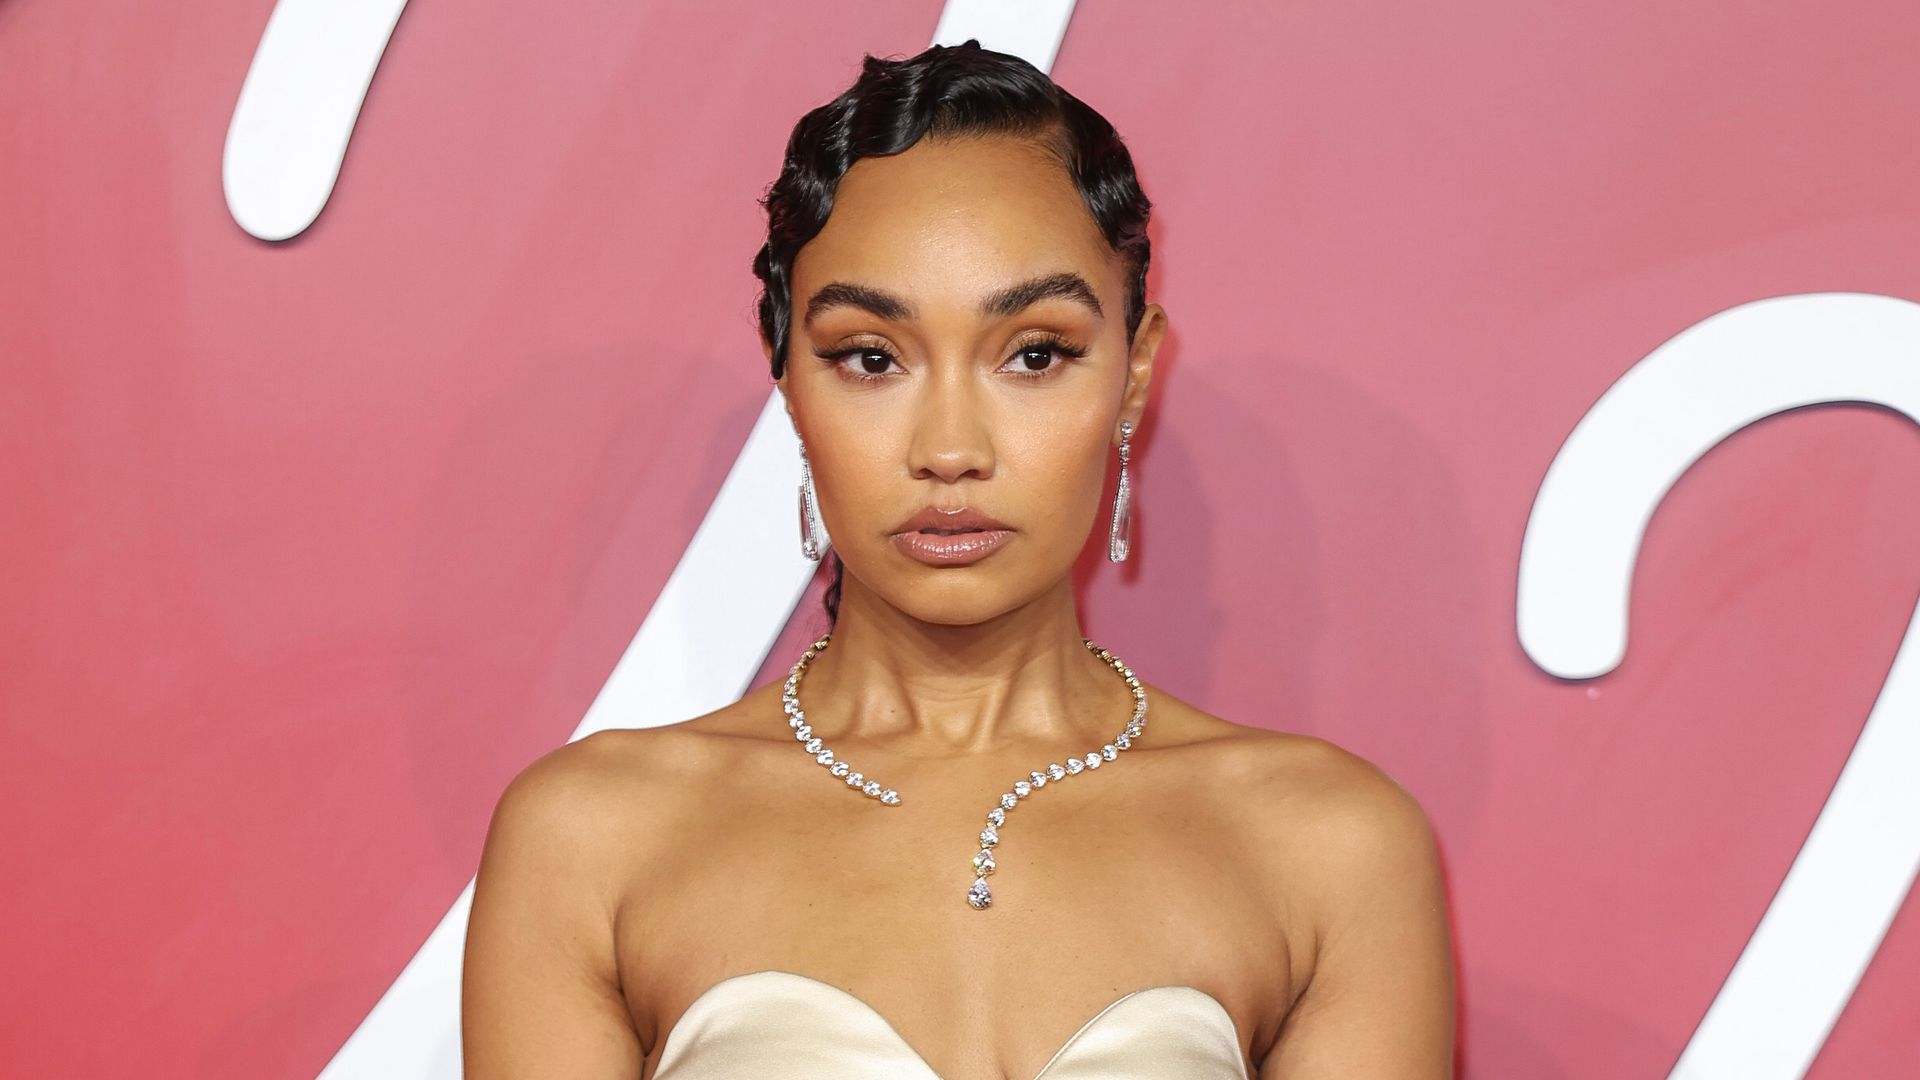 Leigh-Anne Pinnock attends The Fashion Awards 2022 at the Royal Albert Hall on December 05, 2022 in London, England.